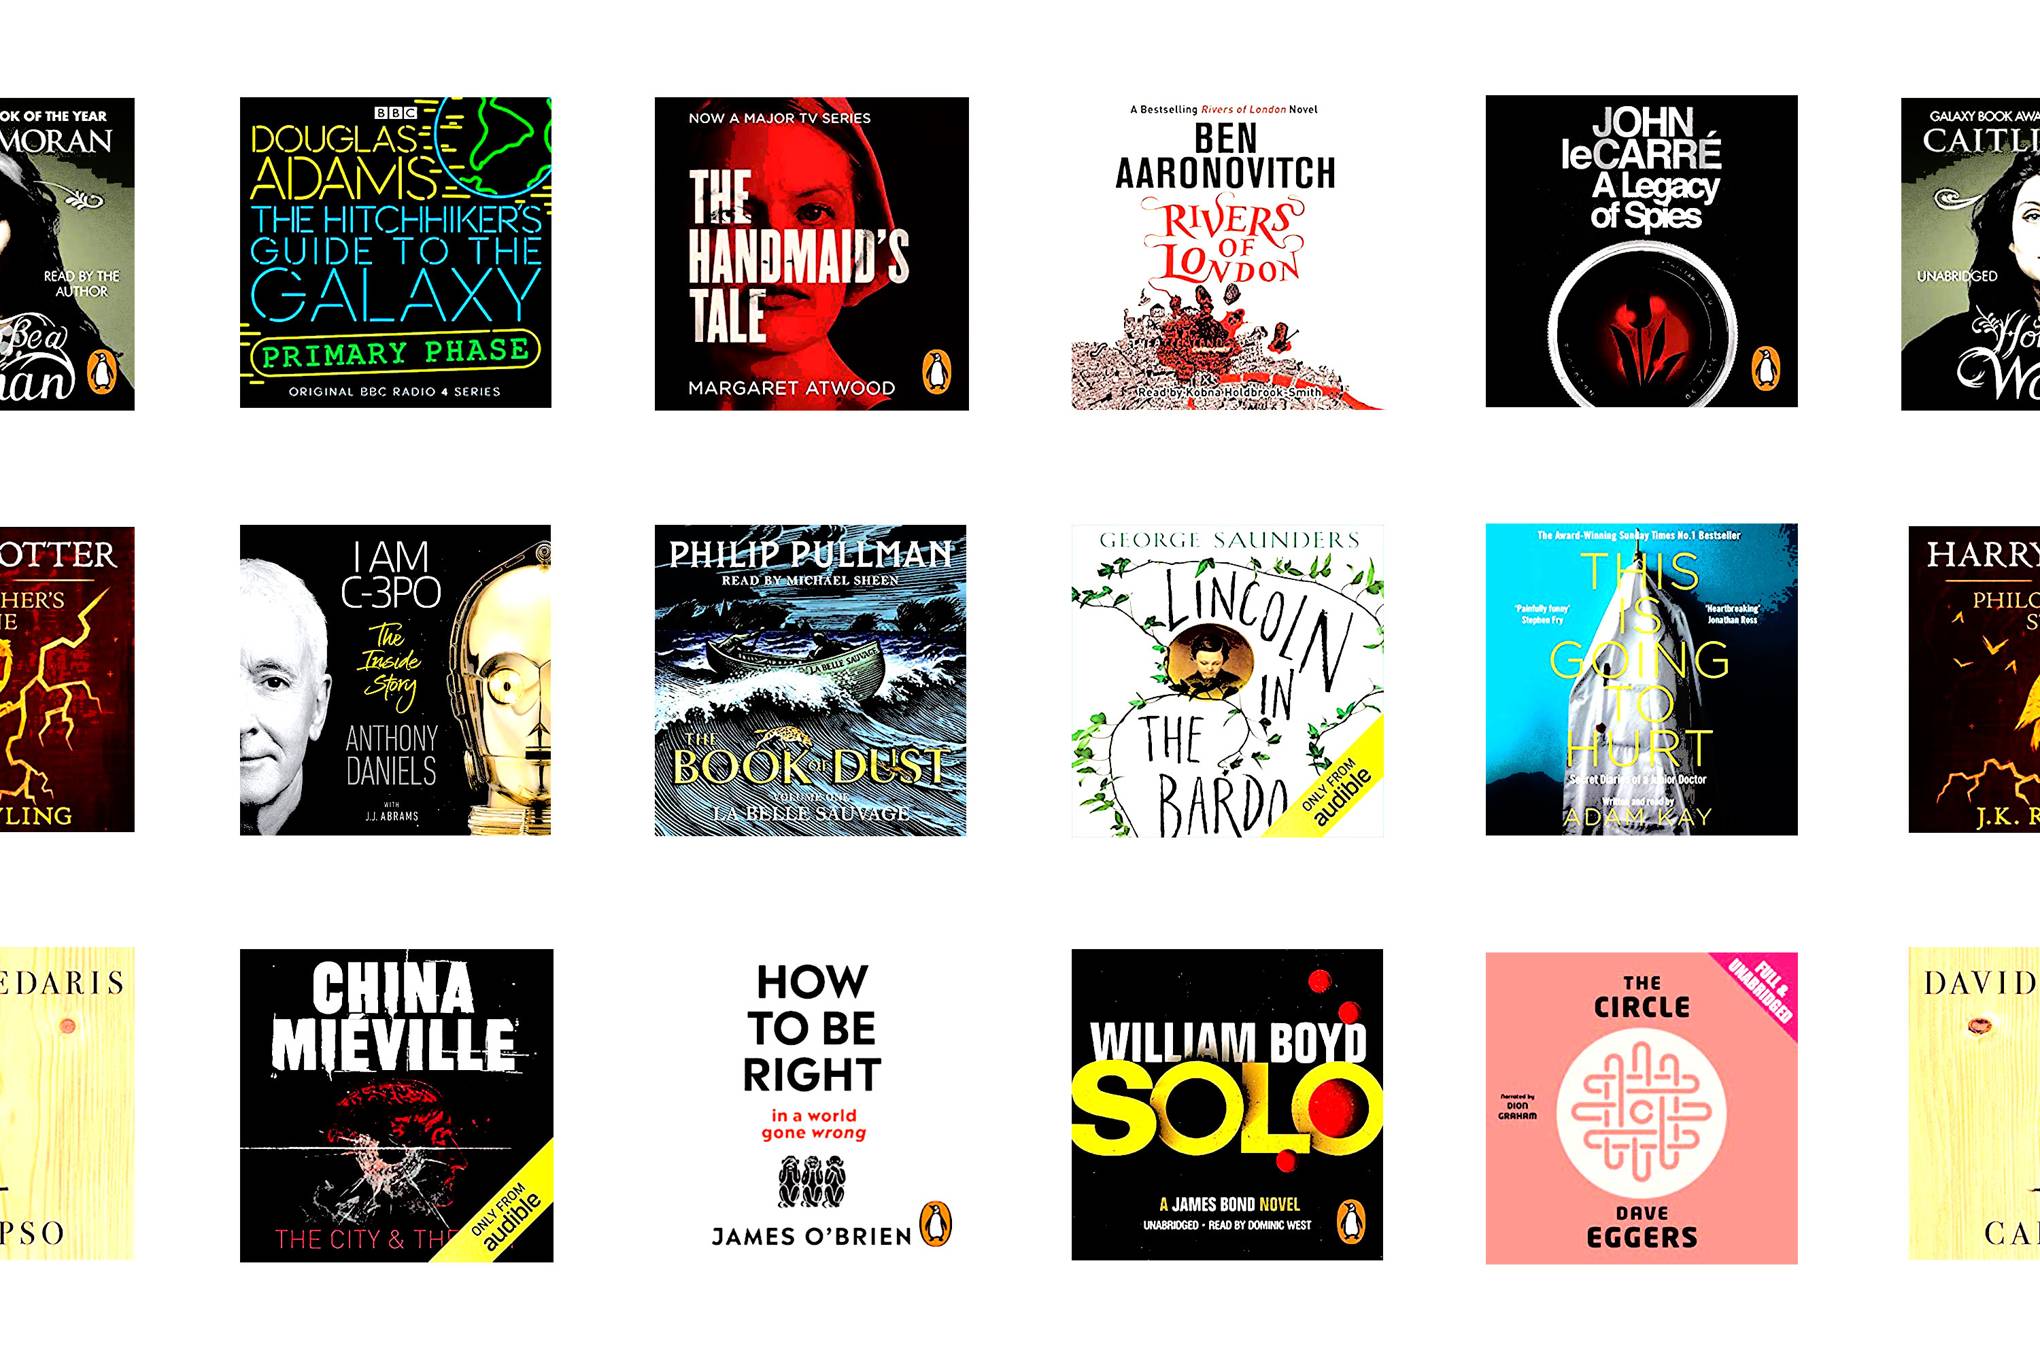 14 Of The Best Audiobooks In 2020 Fiction And Non Fiction Wired Uk Images, Photos, Reviews